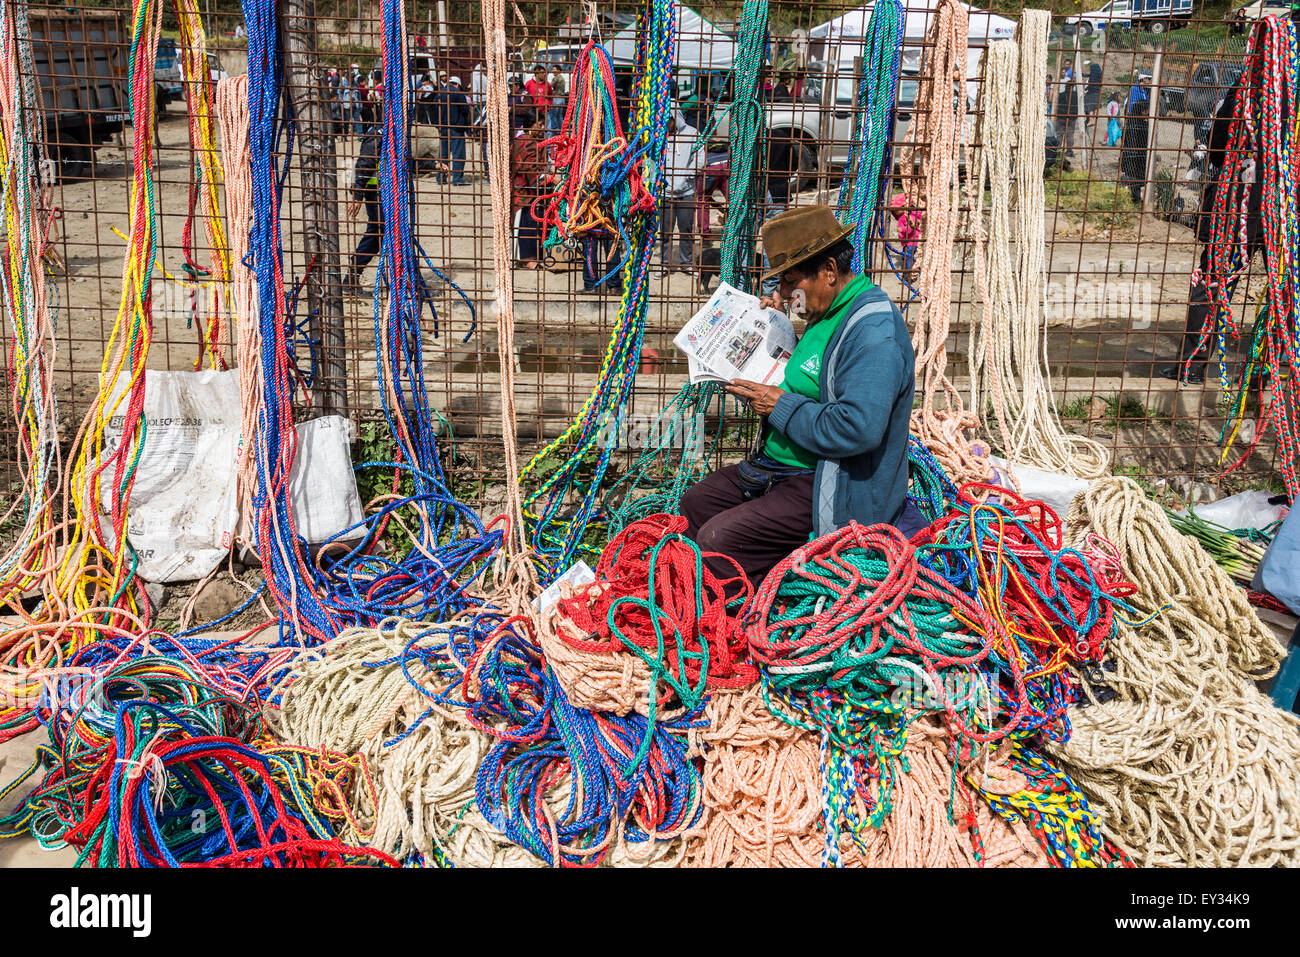 A man reading newspapers while selling colorful hand-made ropes at local market. Otavalo, Ecuador. Stock Photo